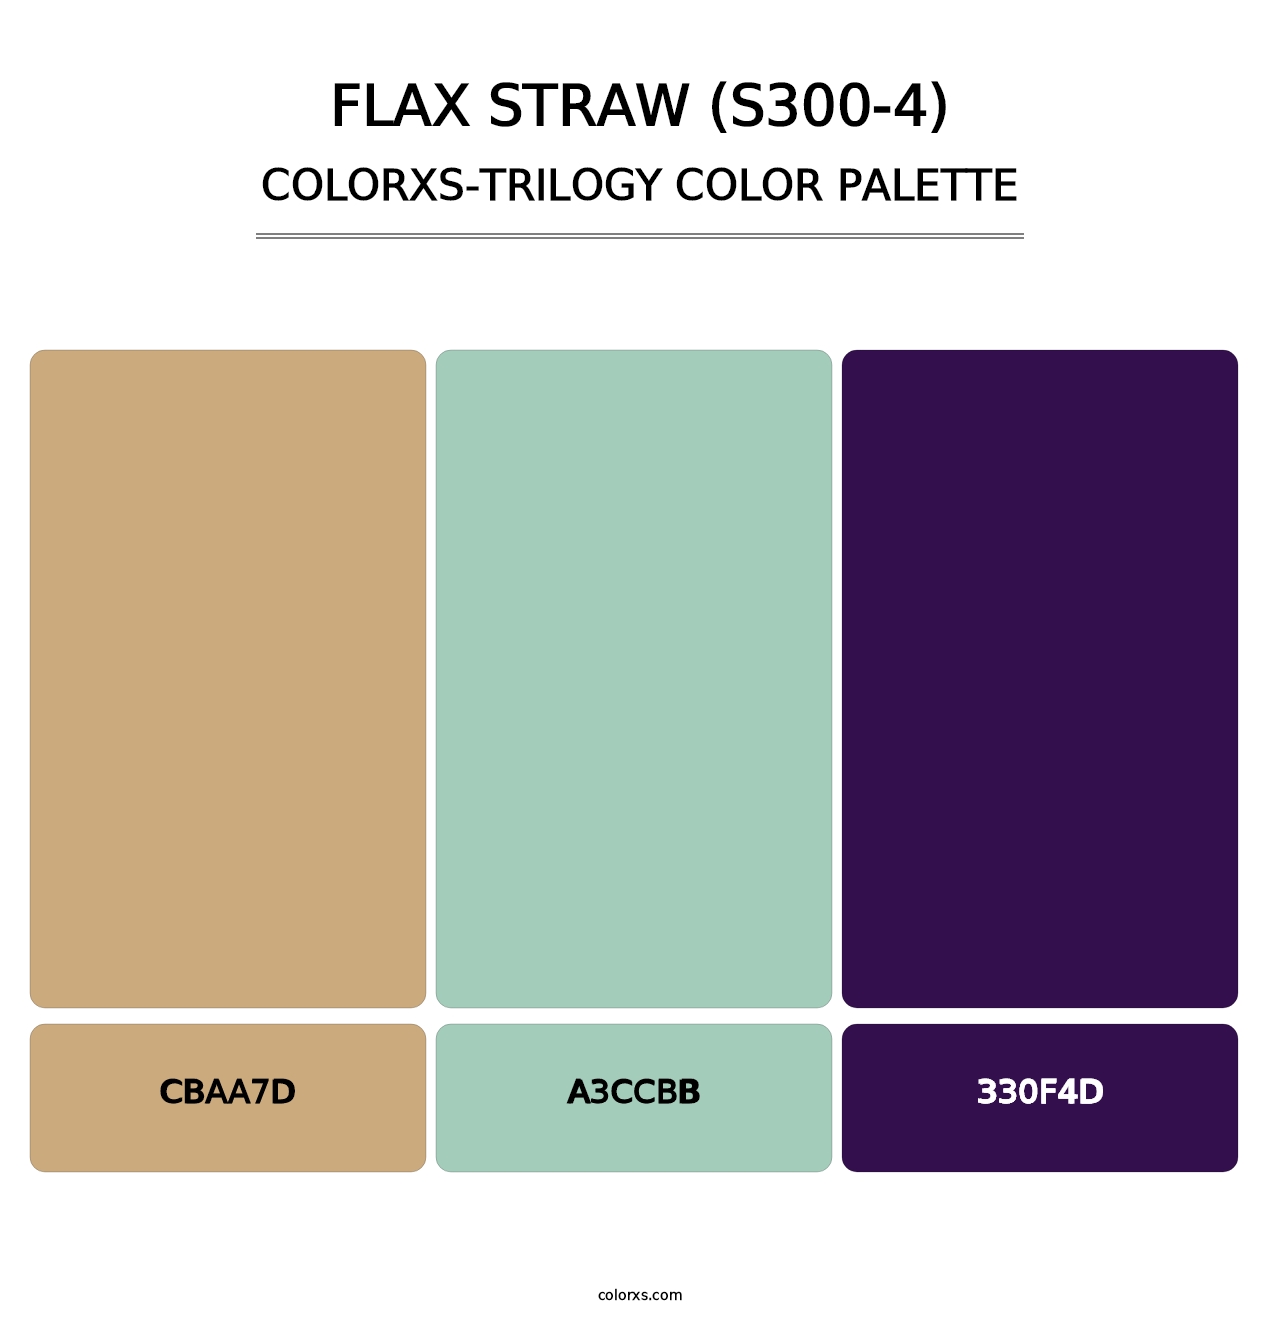 Flax Straw (S300-4) - Colorxs Trilogy Palette